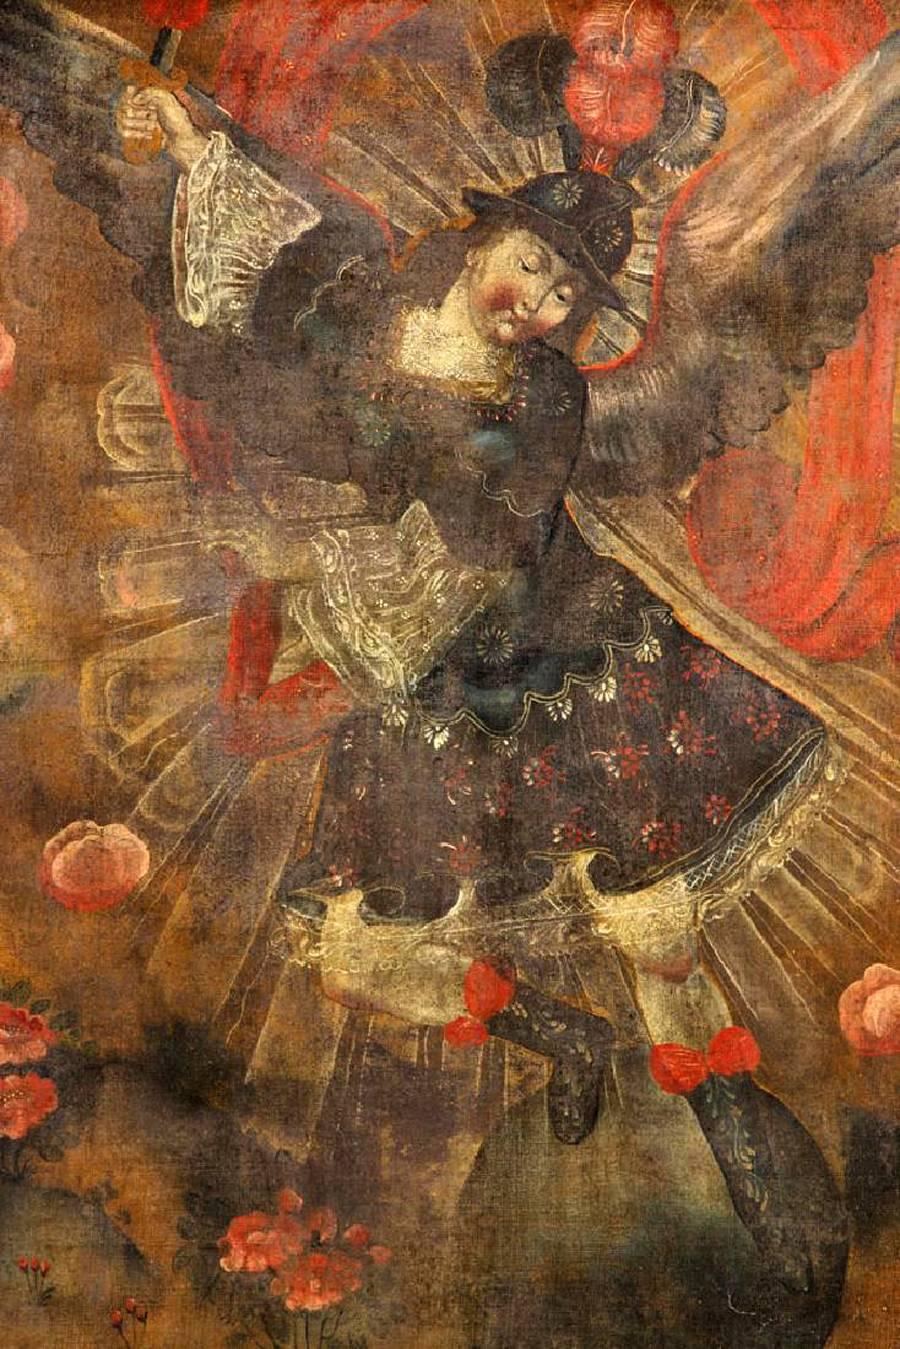 A large oil on canvas painting depicting San Miguel or St Michael the Archangel wielding his sward with his wings spread. Cuzco School, Peru, circa early to mid-18th century. In a period gilt and mirrored frame.
Measures: Painting on view is 37 H x